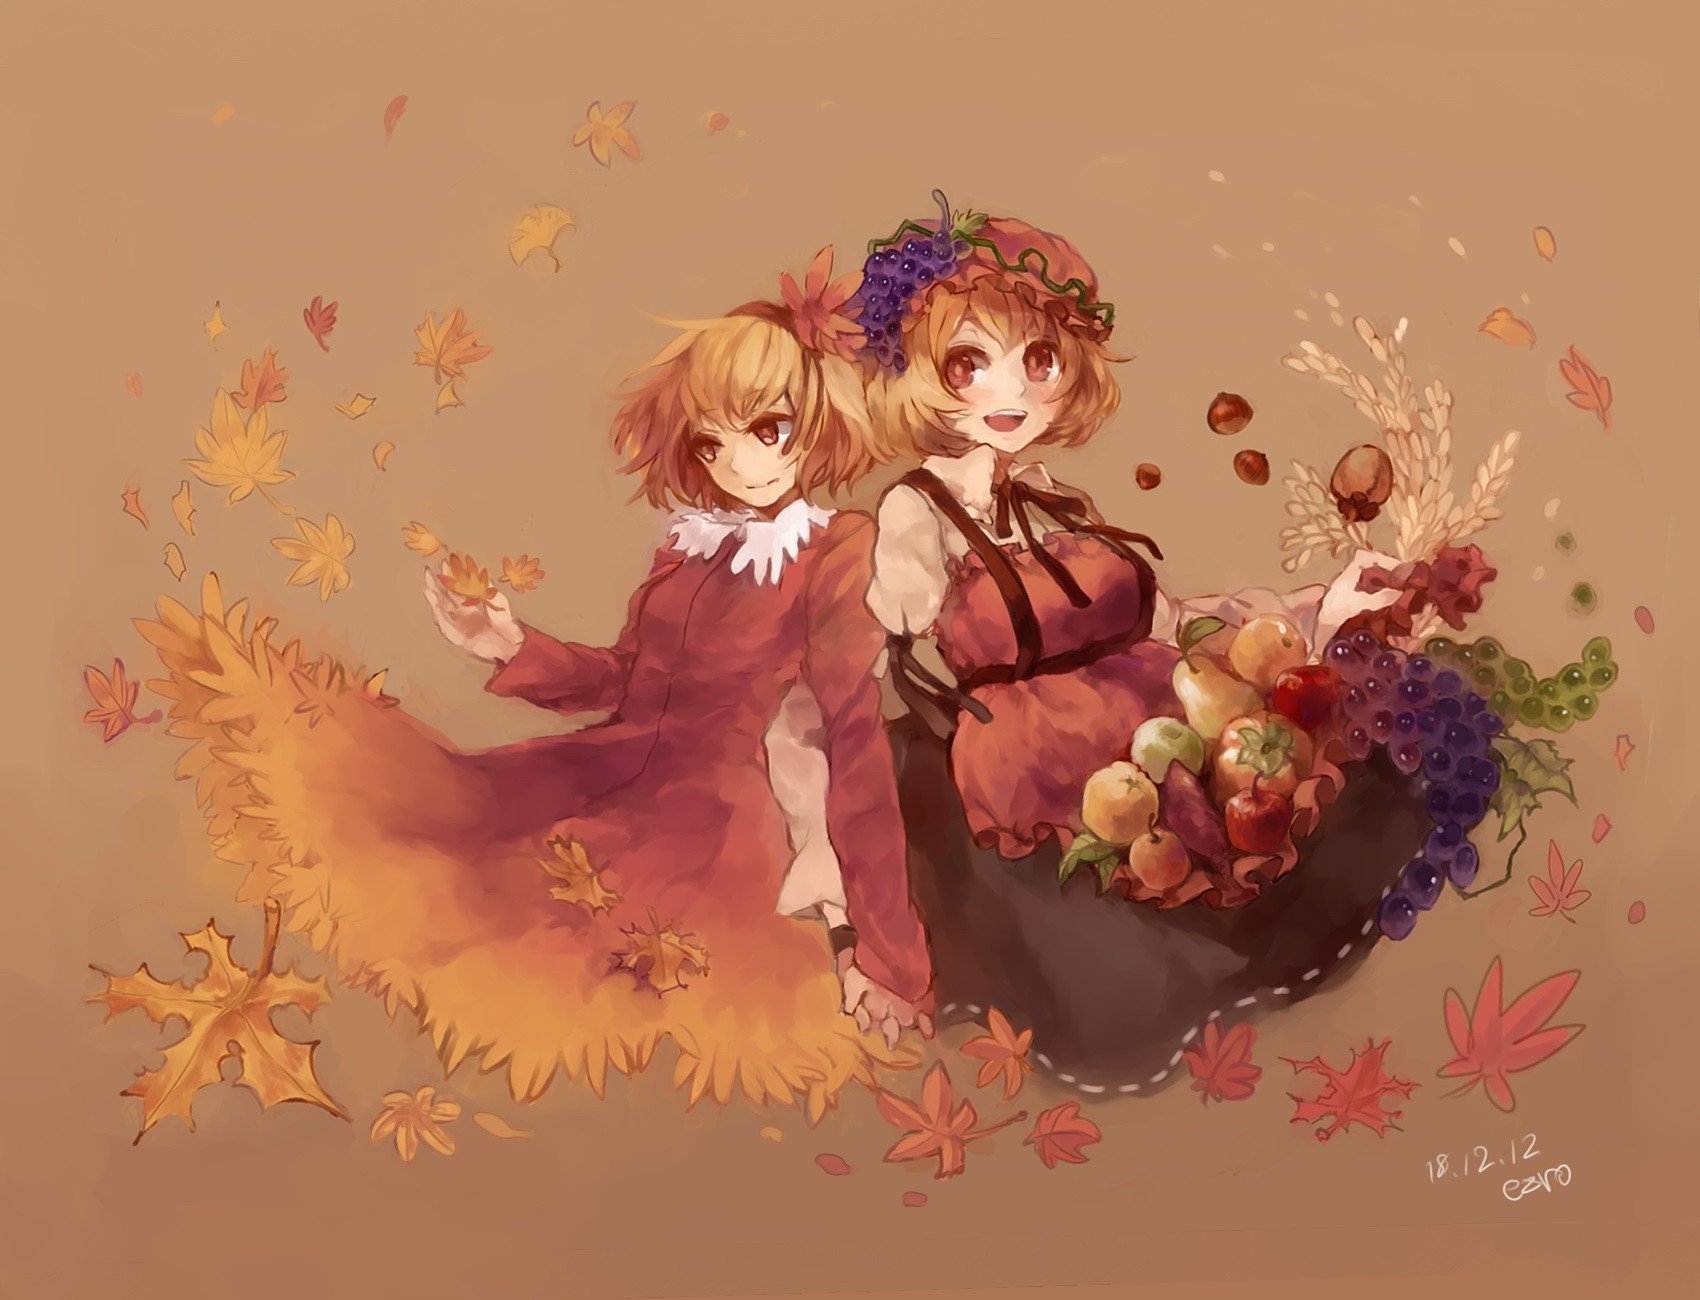 blondes, Video, Games, Touhou, Autumn, Dress, Fruits, Leaves, Goddess, Grapes, Red, Eyes, Short, Hair, Yellow, Eyes, Mountain, Of, Faith, Blush, Red, Dress, Sisters, Open, Mouth, Cereal, Pears, Aprons, Holding, Wallpaper